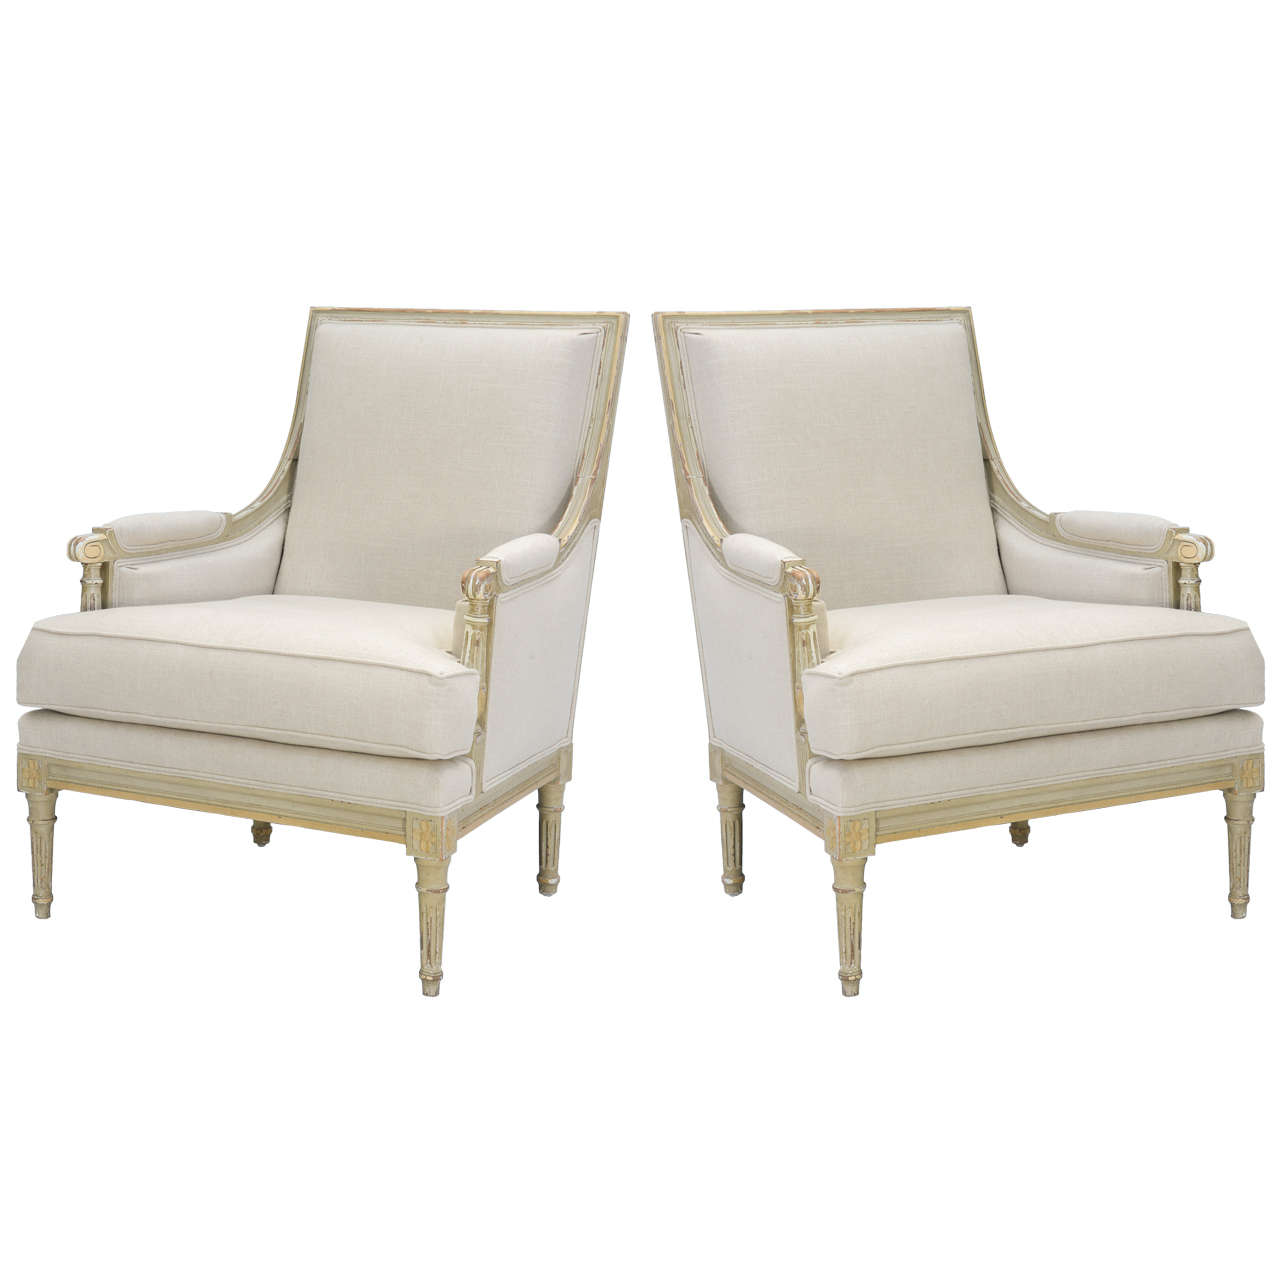 Pair of 19th Century Bergere Chairs